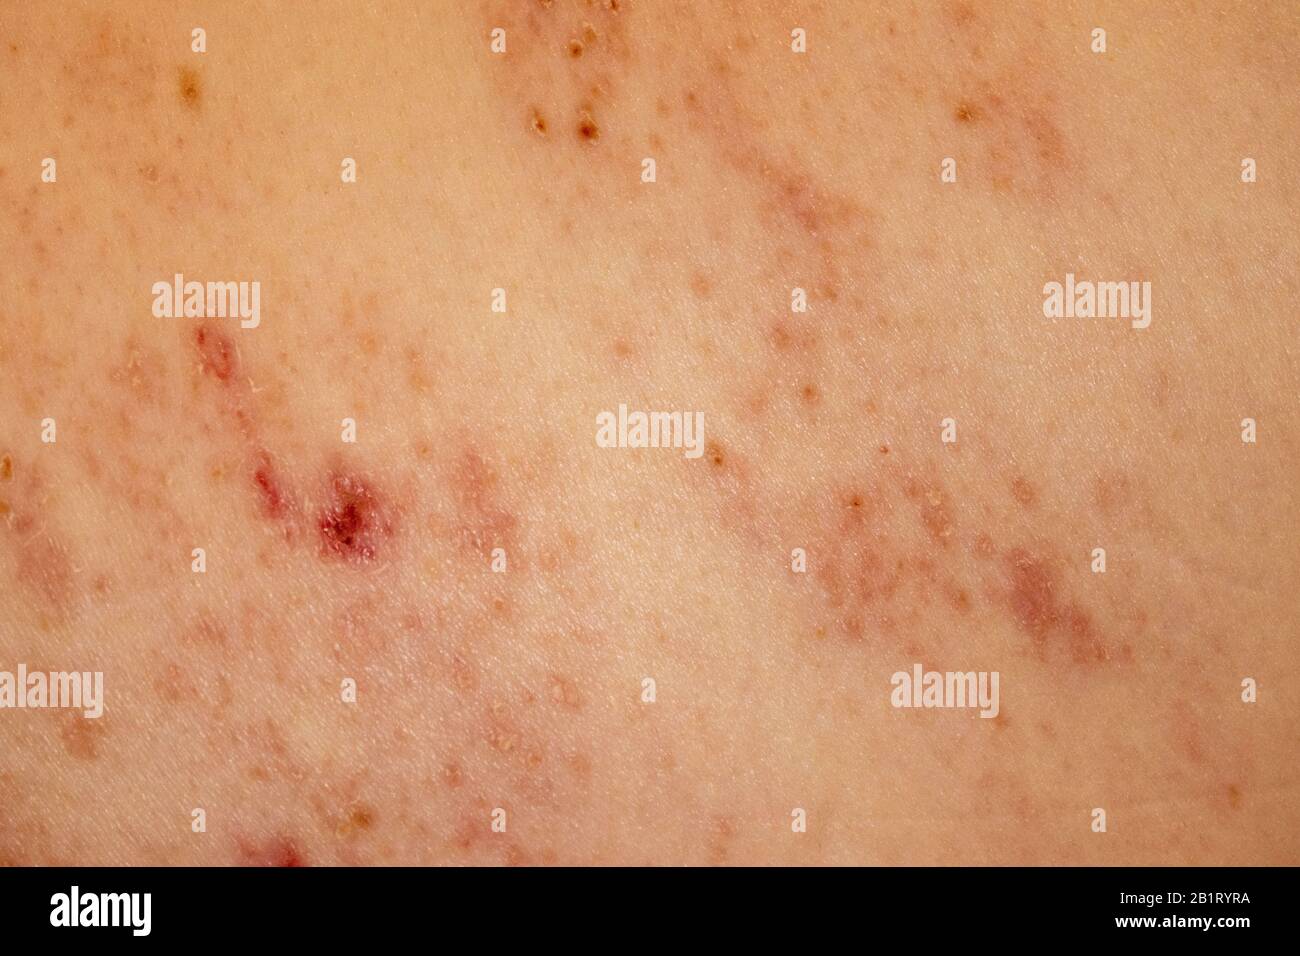 Shingles Herpes Zoster infection Rash Caucasion Male 59 years old Stock Photo